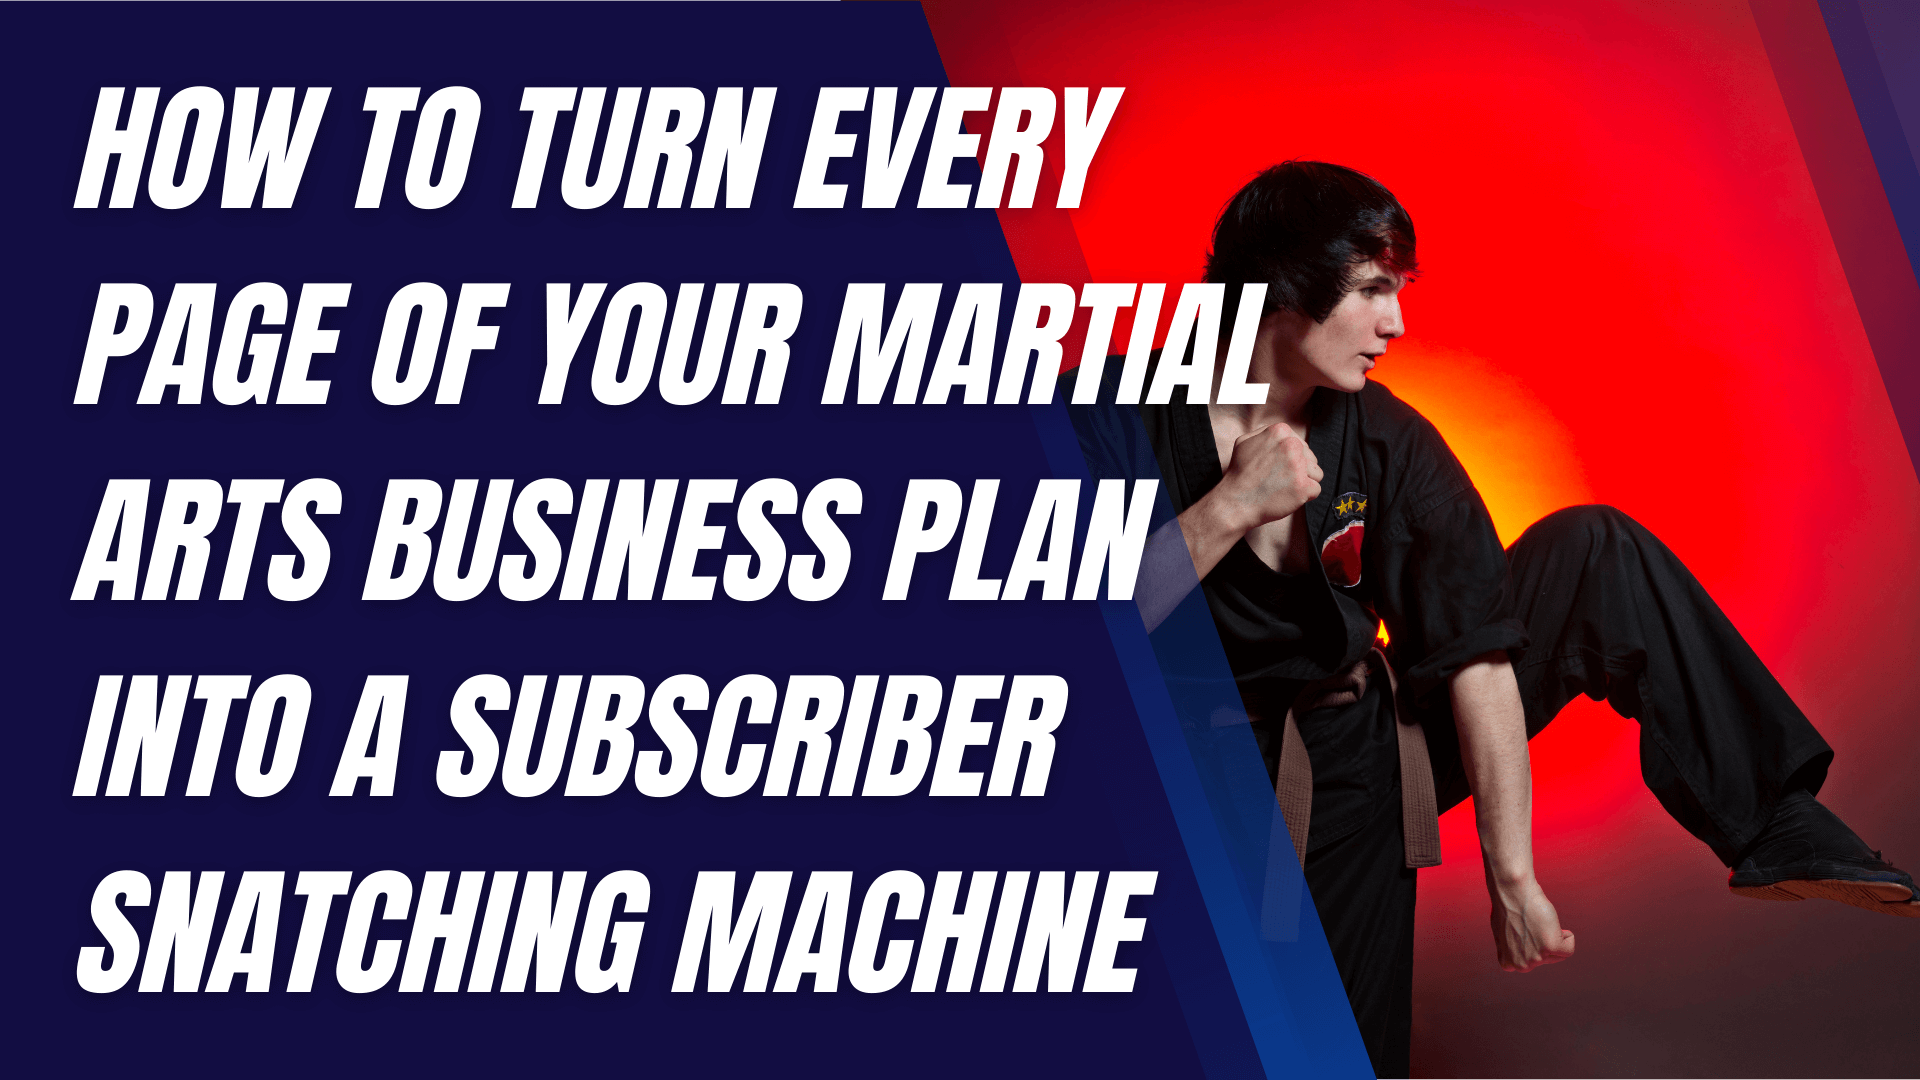 How to Turn Every Page of Your Martial Arts Business Plan into a Subscriber Snatching Machine